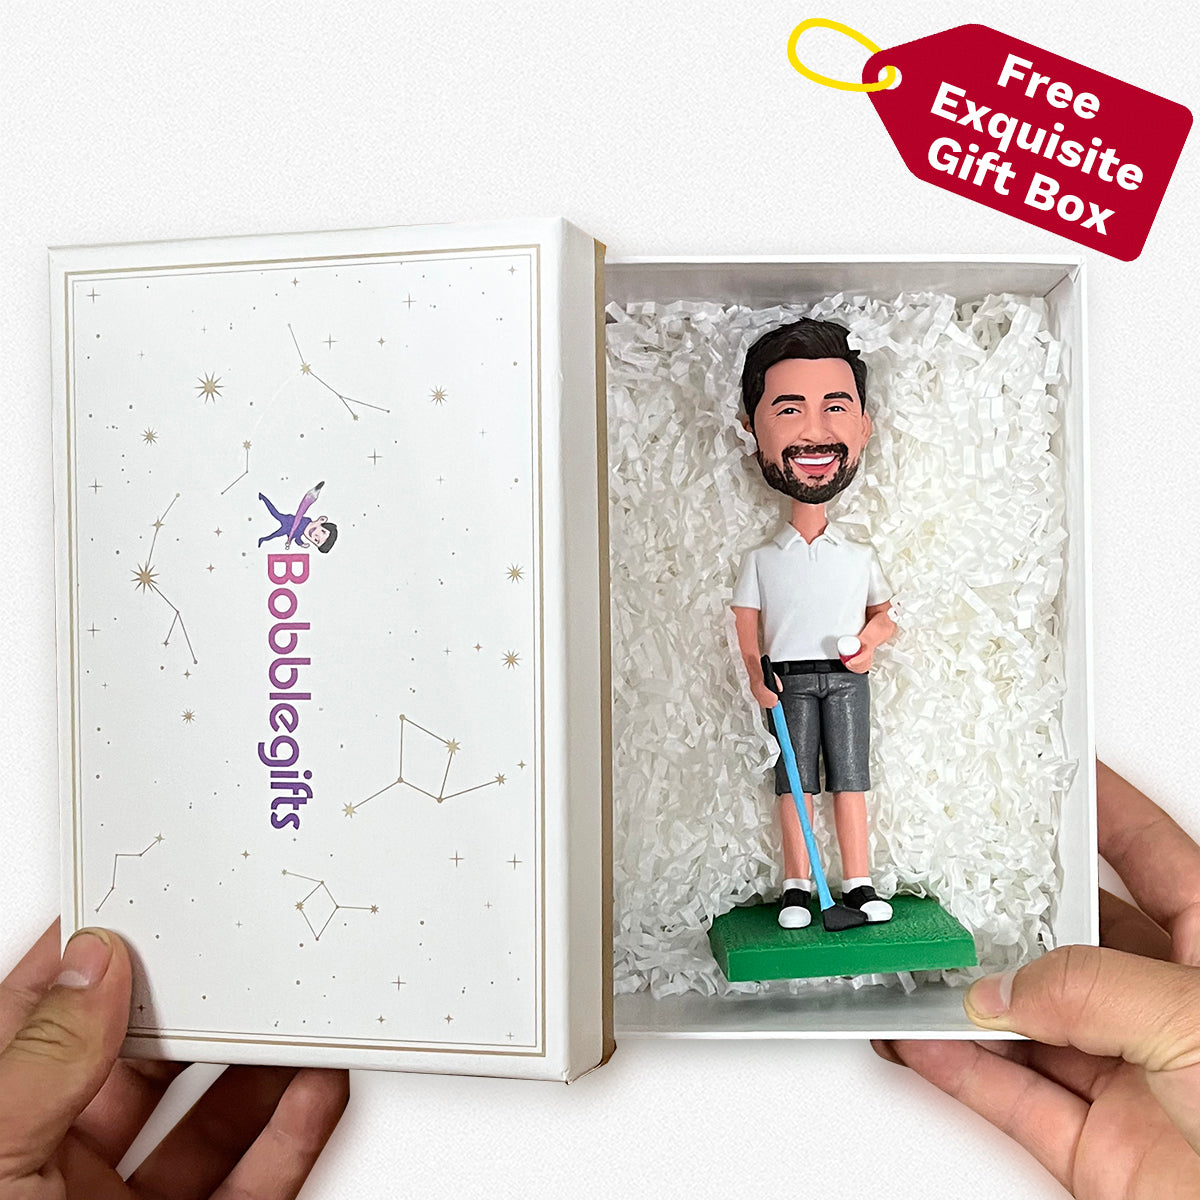 Playing Golf Personalized Custom Bobble Head Doll